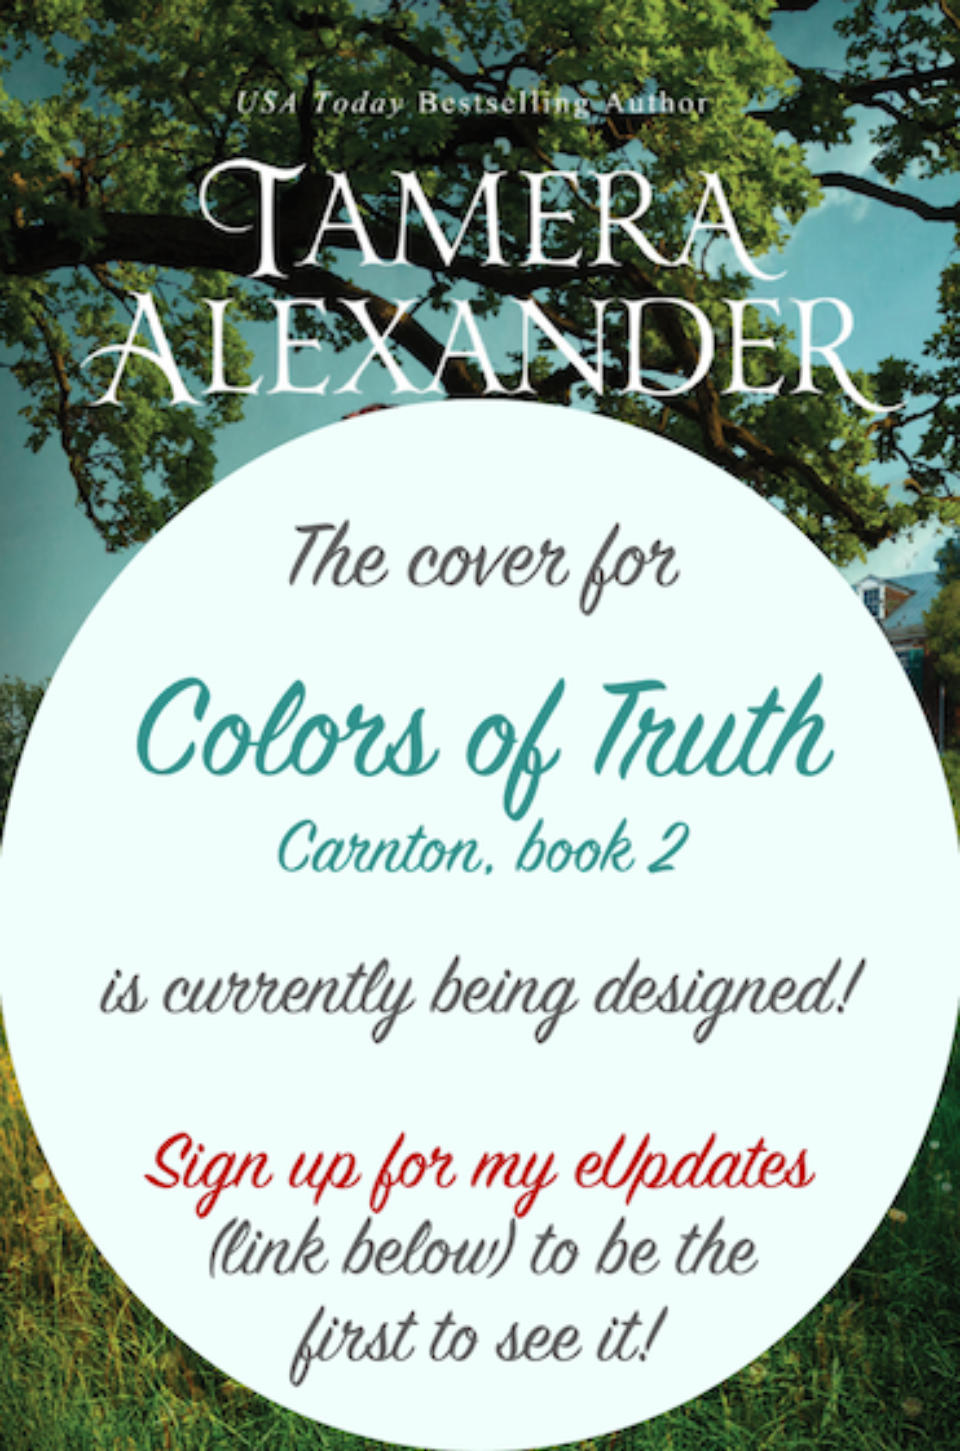 Colors of Truth, book 2 in the Carnton novels (coming Spring 2020) CLICK to sign up for my eUpdates and I'll reach out when it releases!